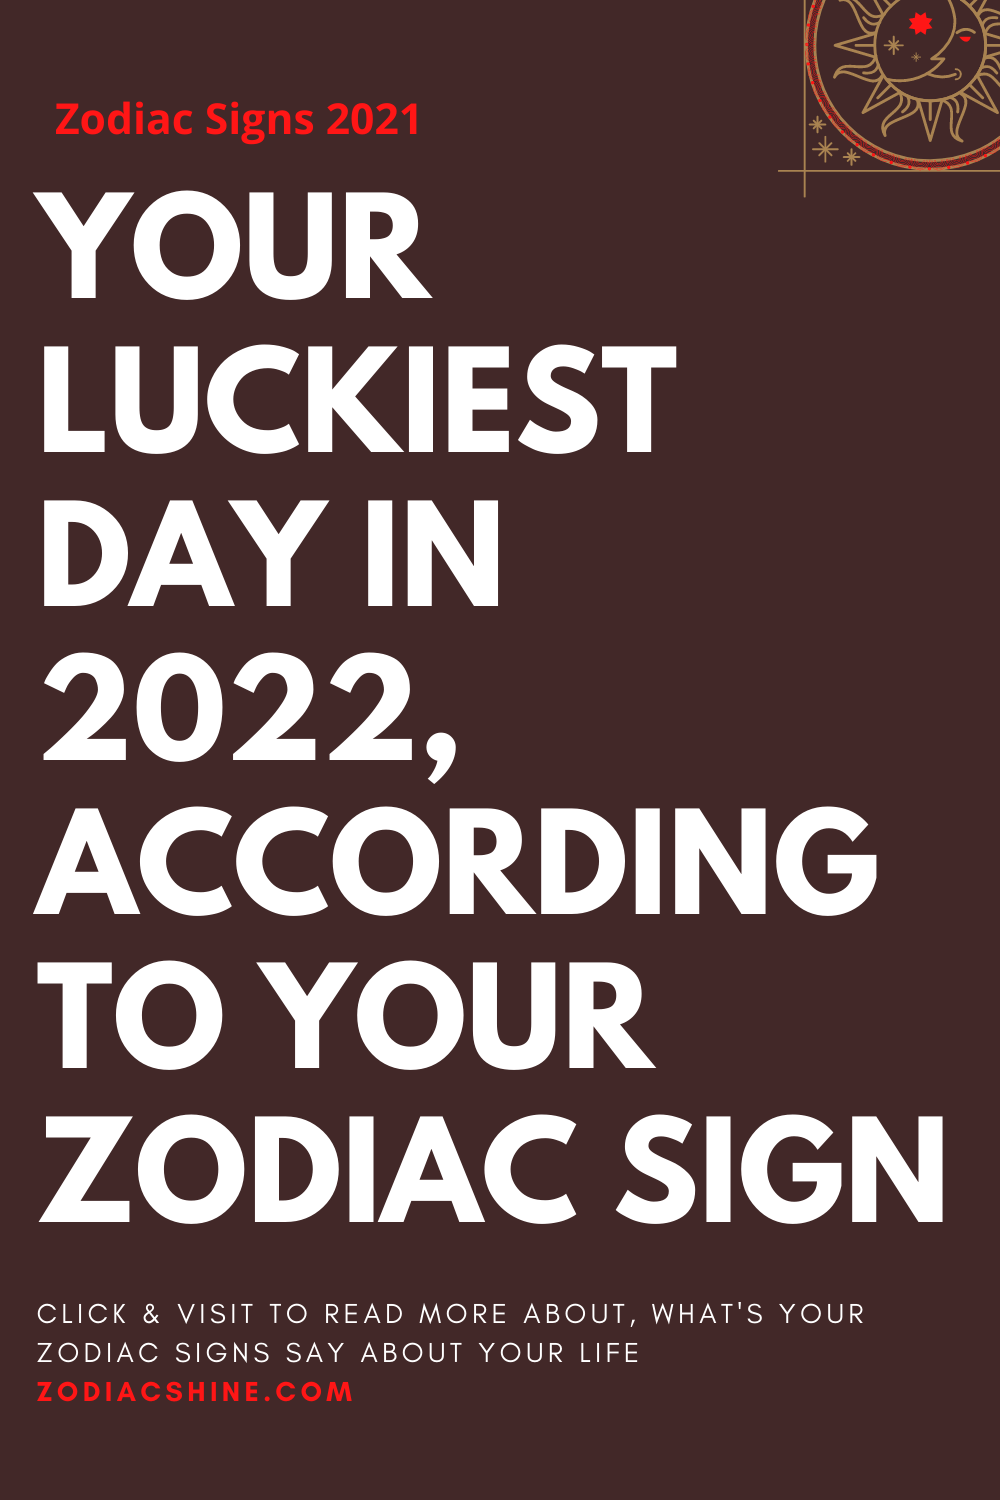 YOUR LUCKIEST DAY IN 2022, ACCORDING TO YOUR ZODIAC SIGN